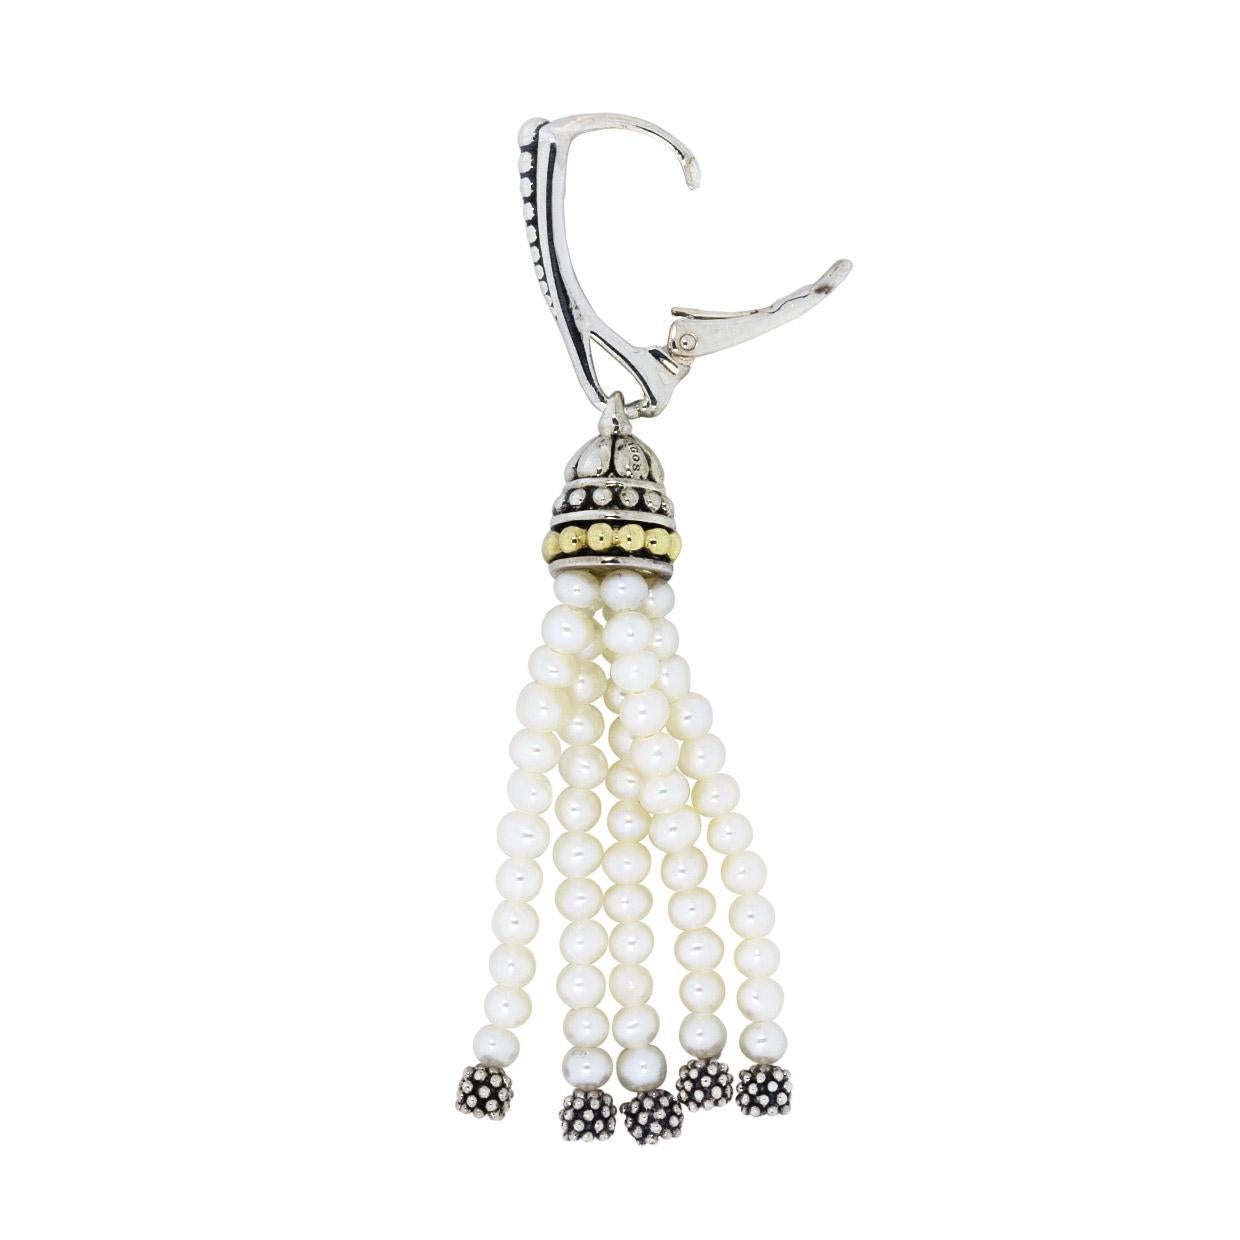 Item Details
Main Stone Shape Round
Main Stone Treatment Not Enhanced
Main Stone Creation Natural
Main Stone Pearl
Main Stone Color White
Estimated Retail $725.00
Brand Lagos
Collection Caviar Icon
Metal Mixed Metals
Style Drop/dangle
Fastening